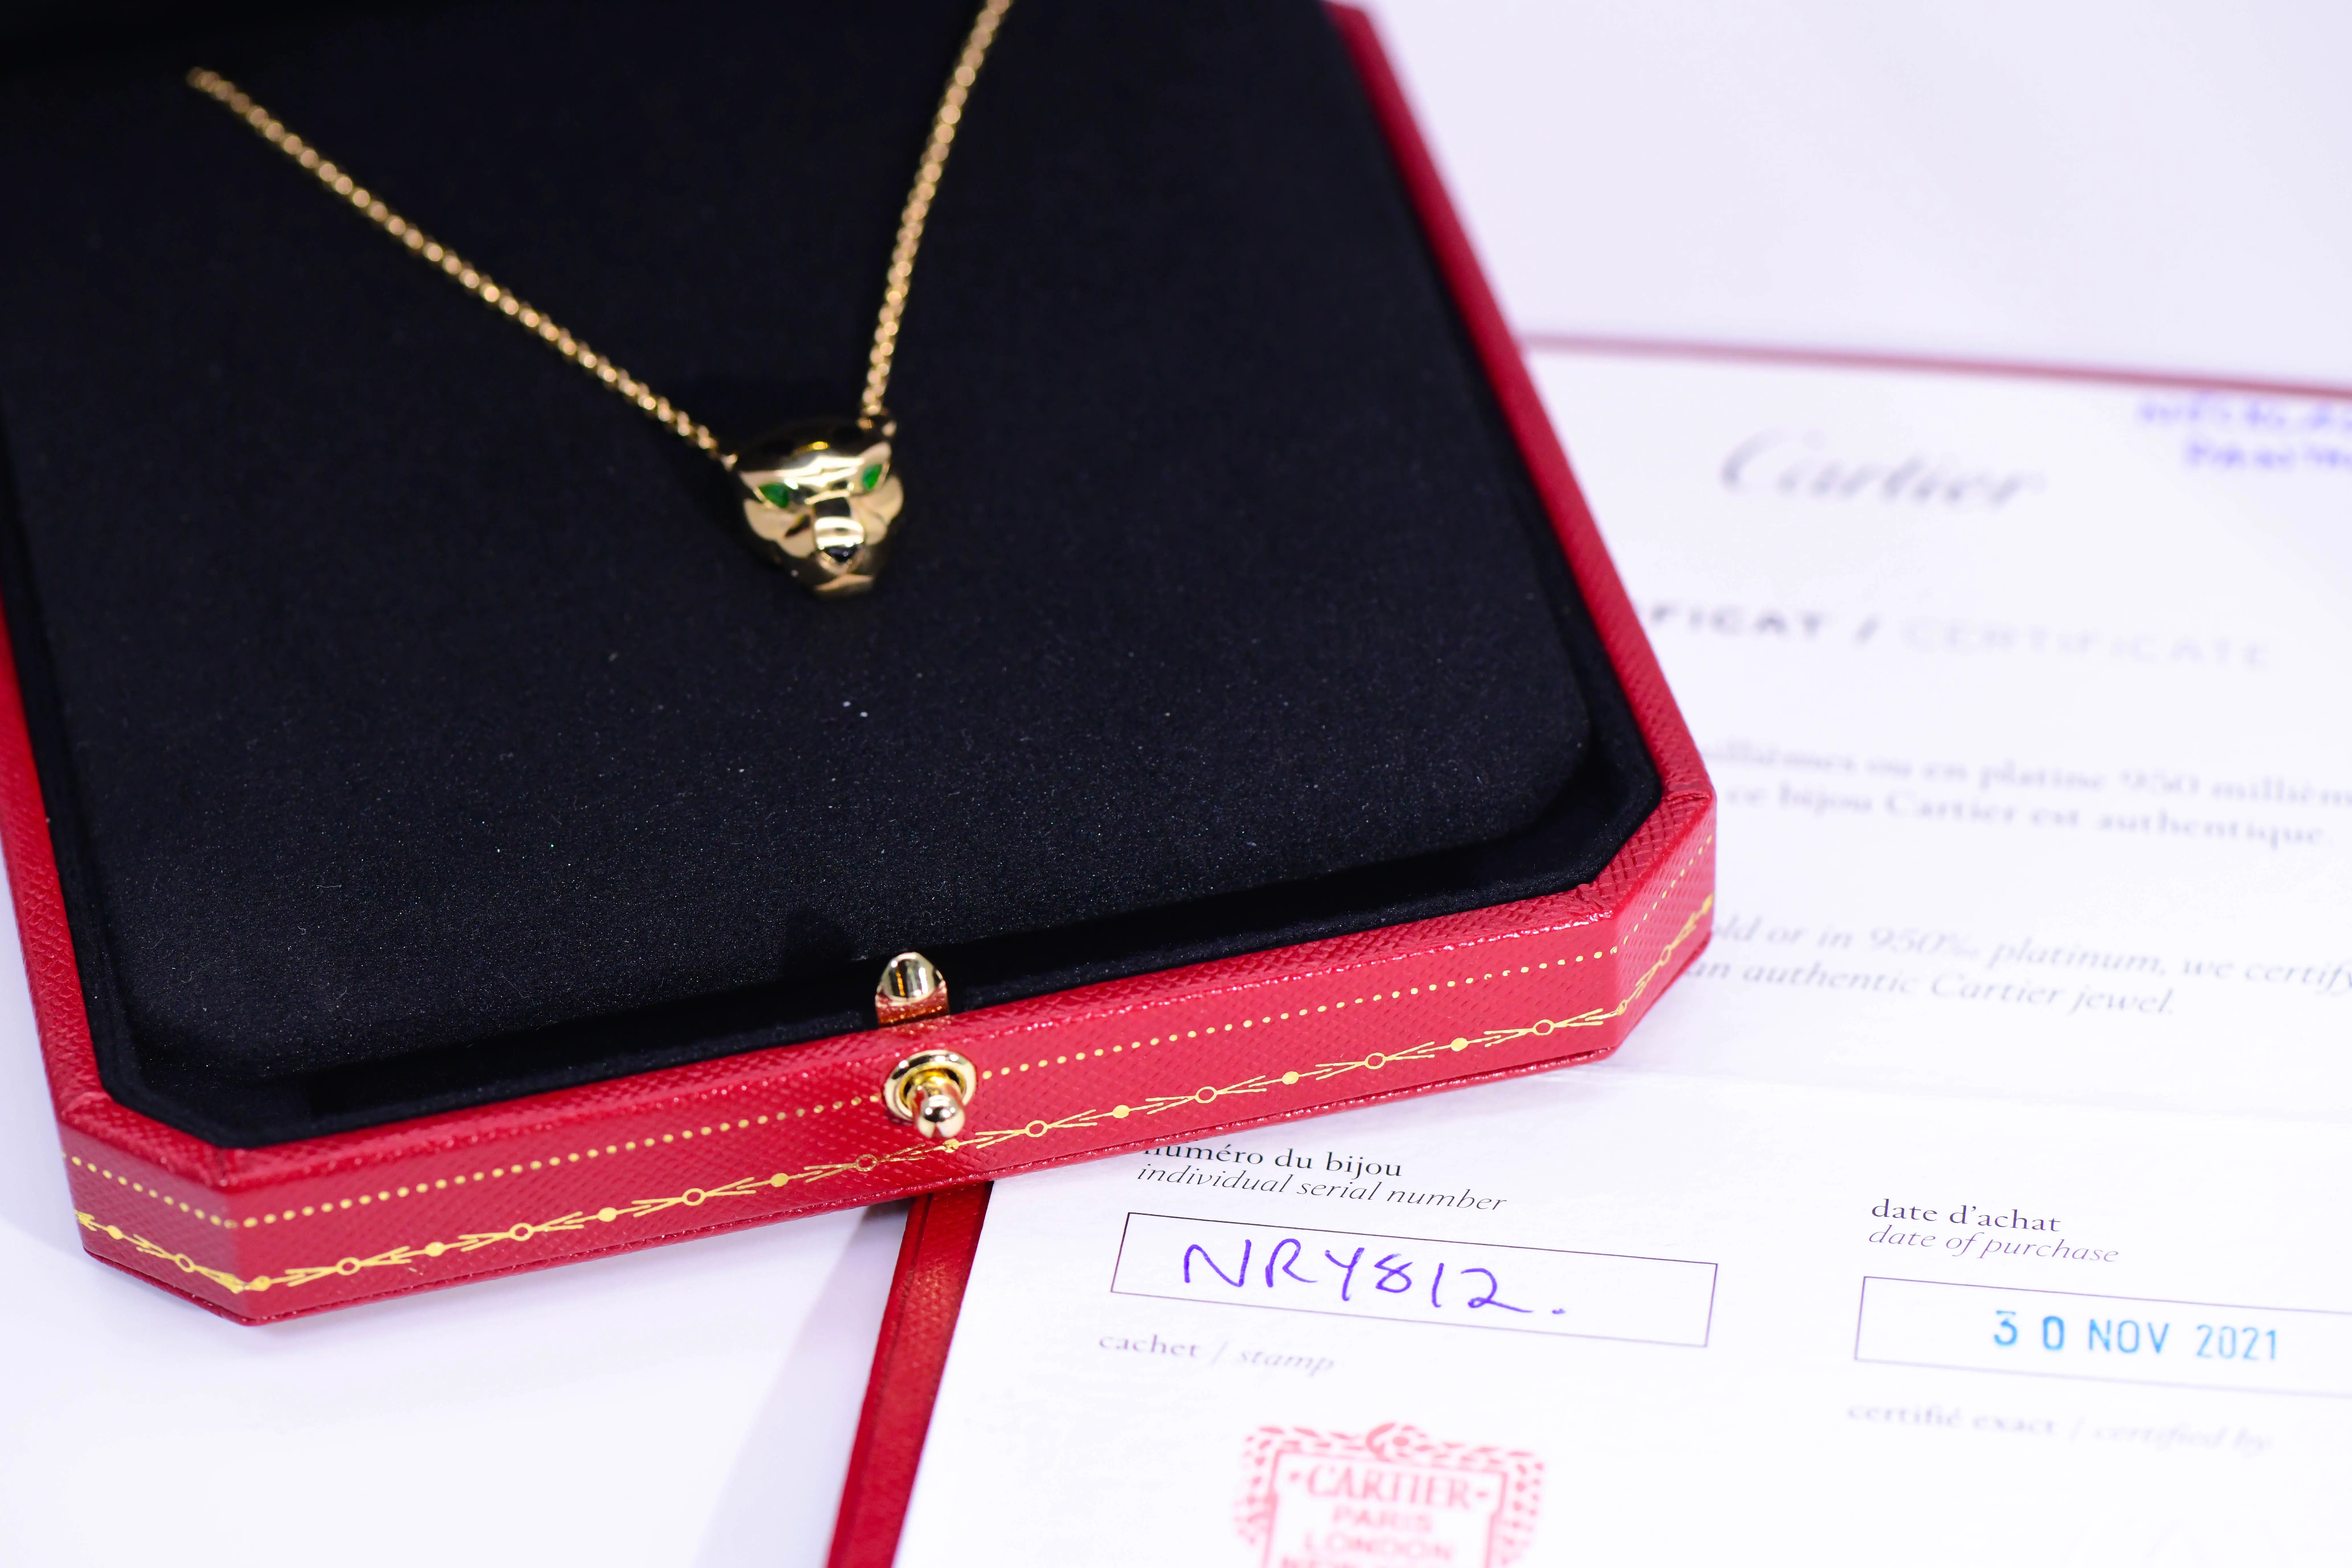 Cartier Panthere 18k Yellow Gold, Enamels and Sapphire Necklace